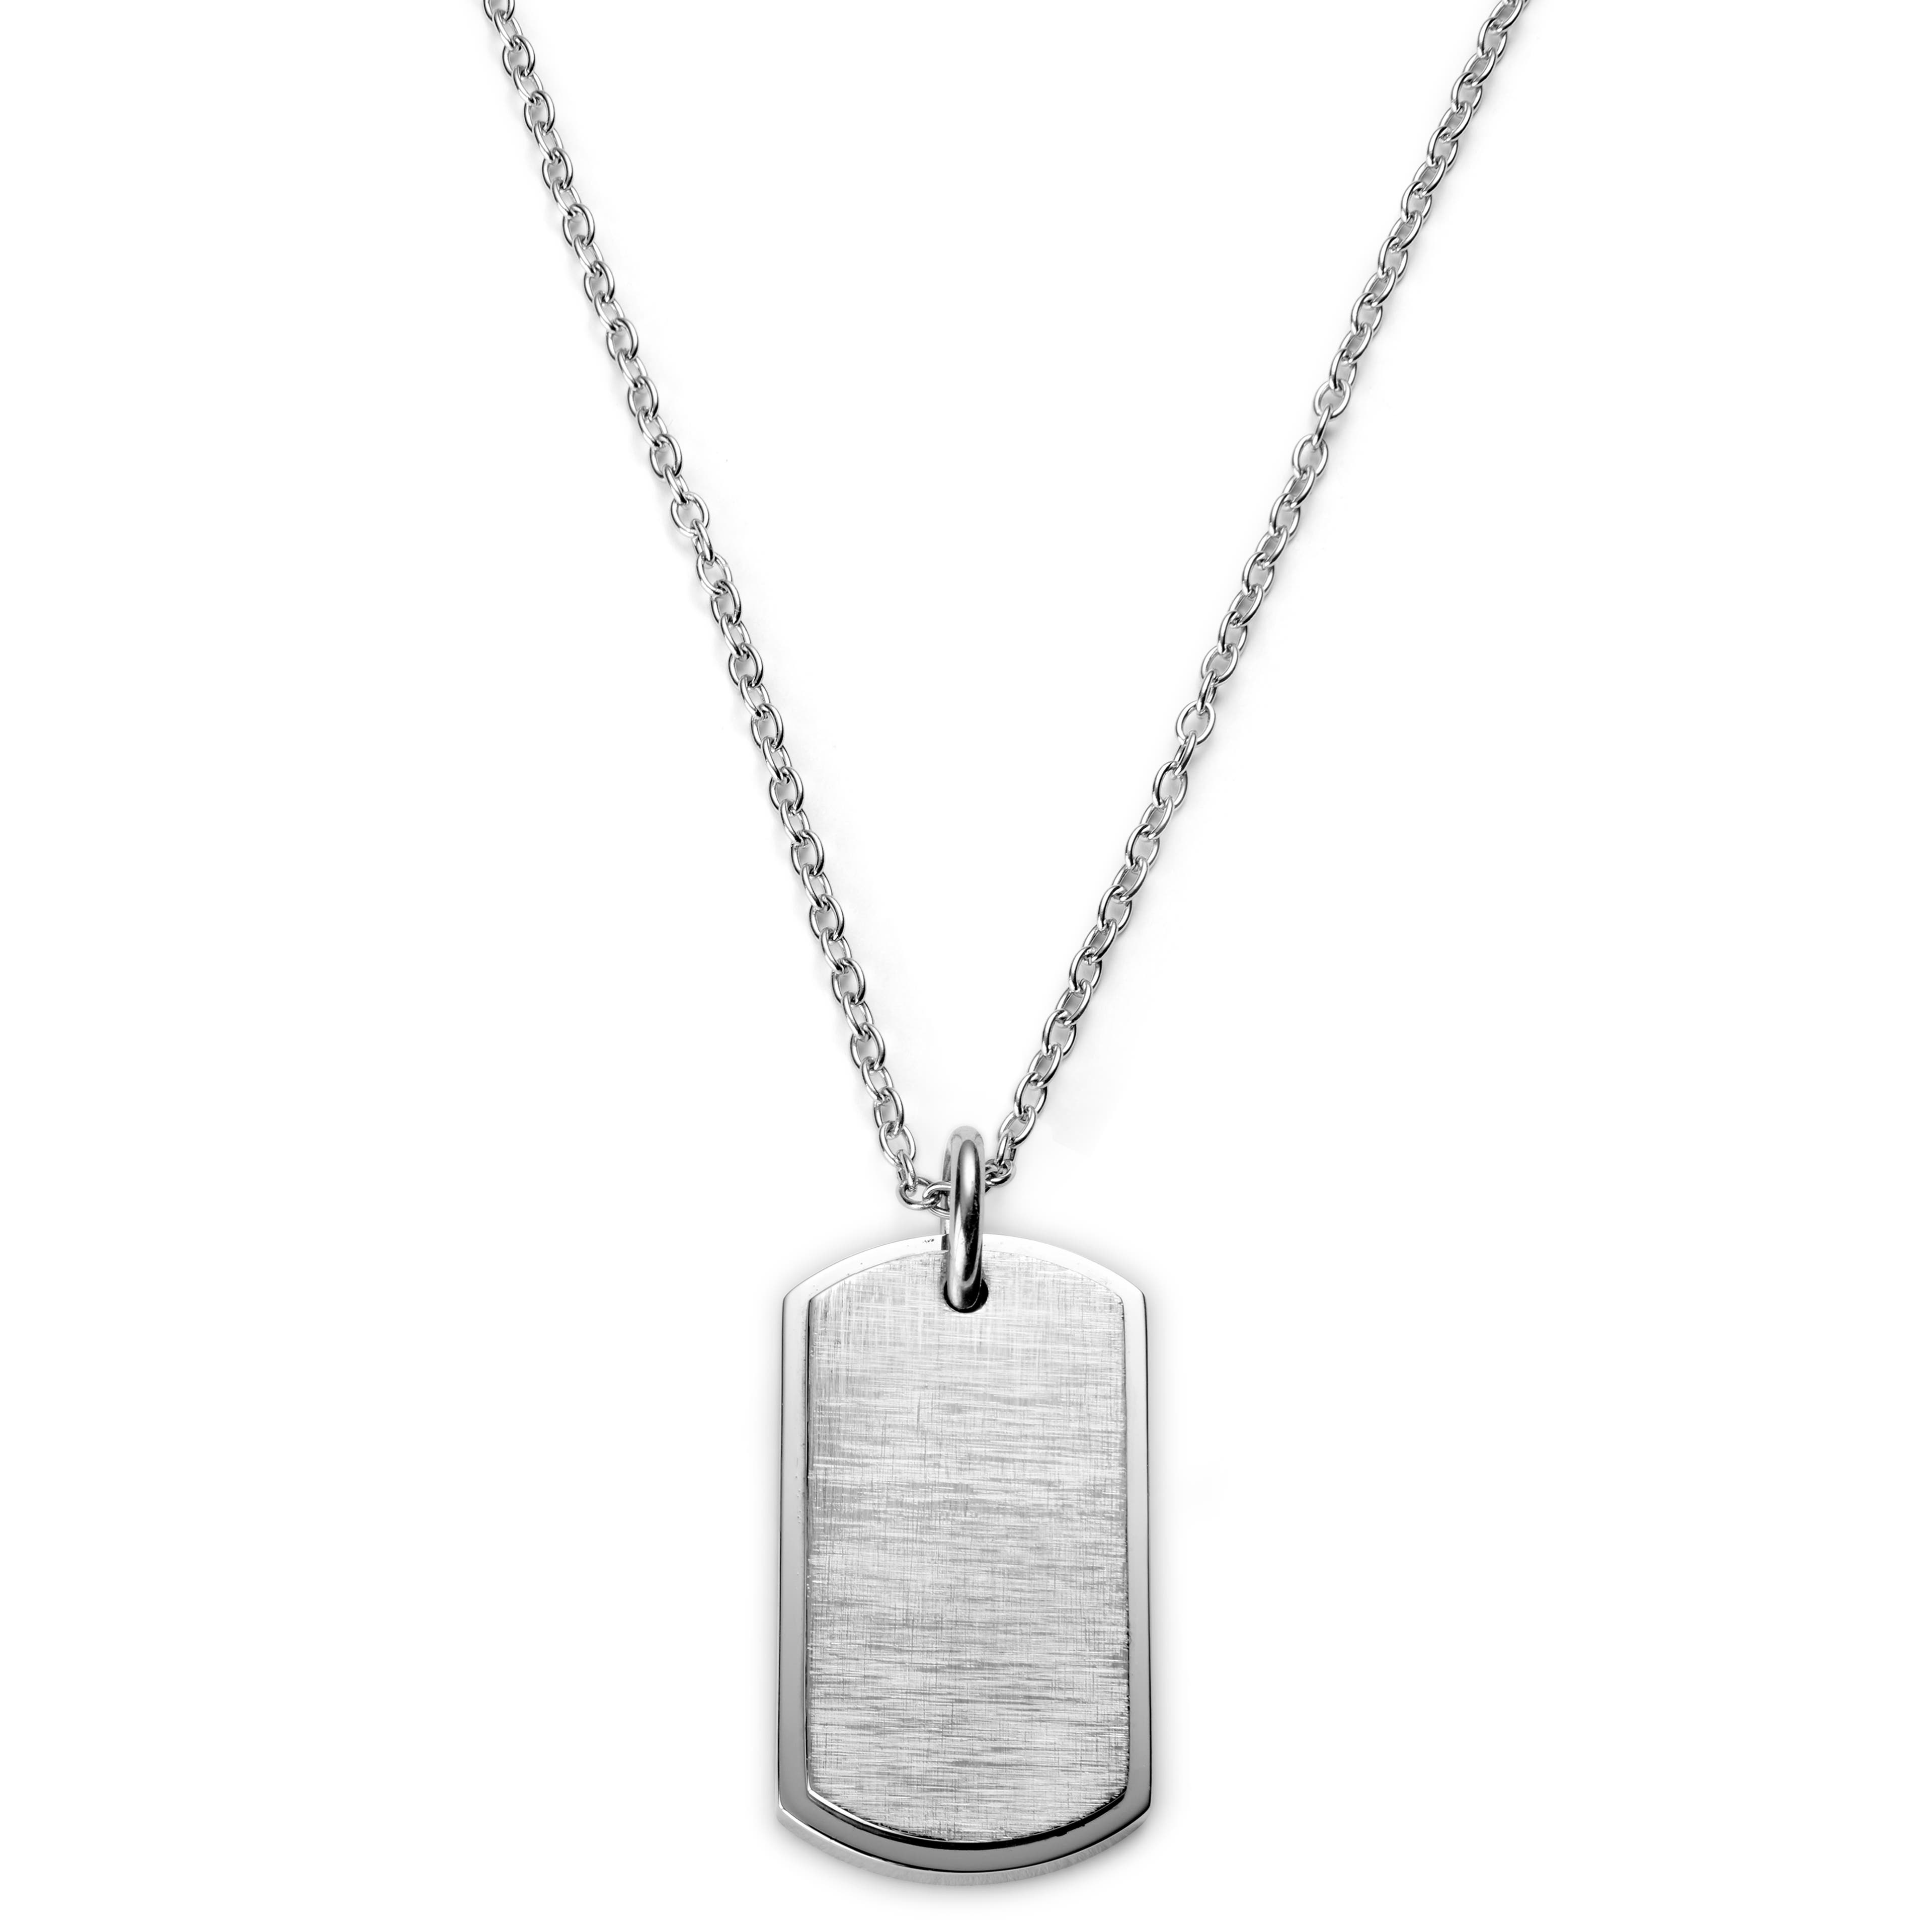 Silver-Tone ID Dog Tag Pendant Necklace